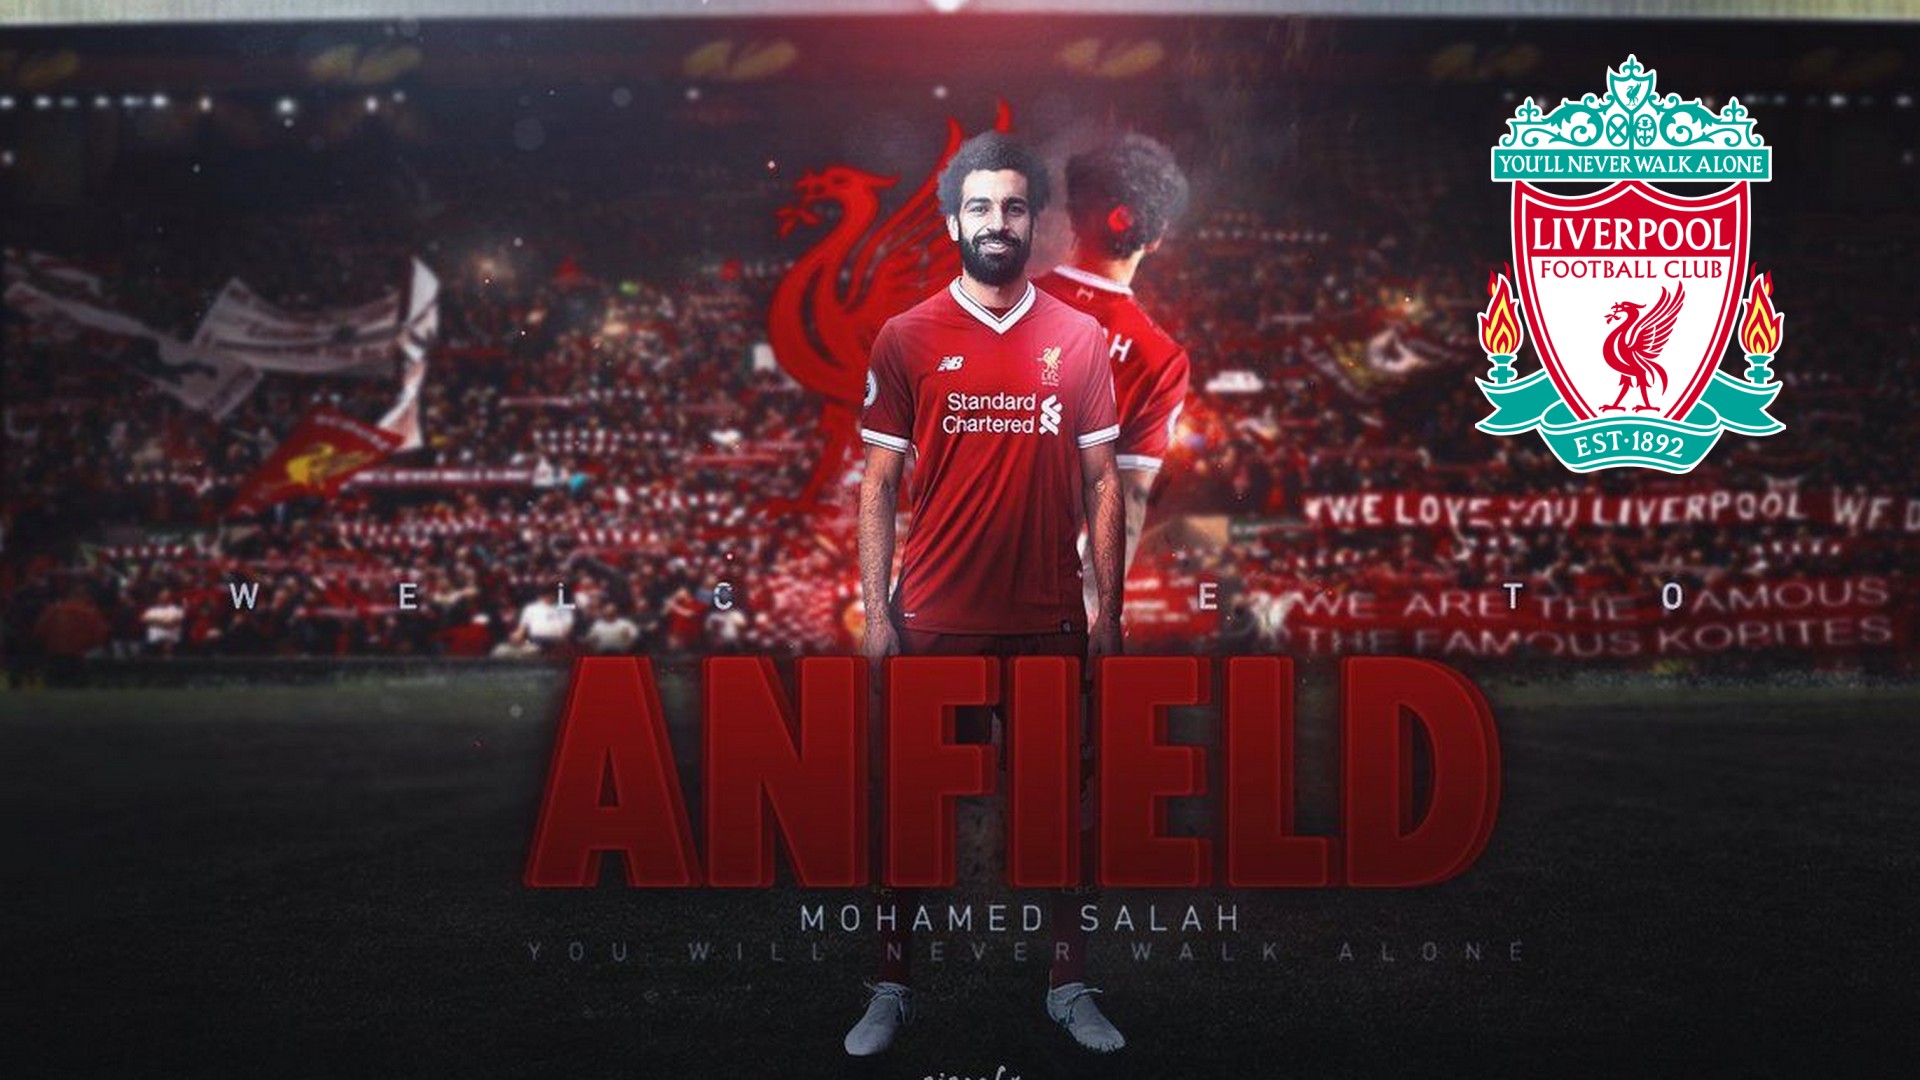 Wallpapers Computer Liverpool Mohamed Salah with image resolution 1920x1080 pixel. You can make this wallpaper for your Desktop Computer Backgrounds, Mac Wallpapers, Android Lock screen or iPhone Screensavers